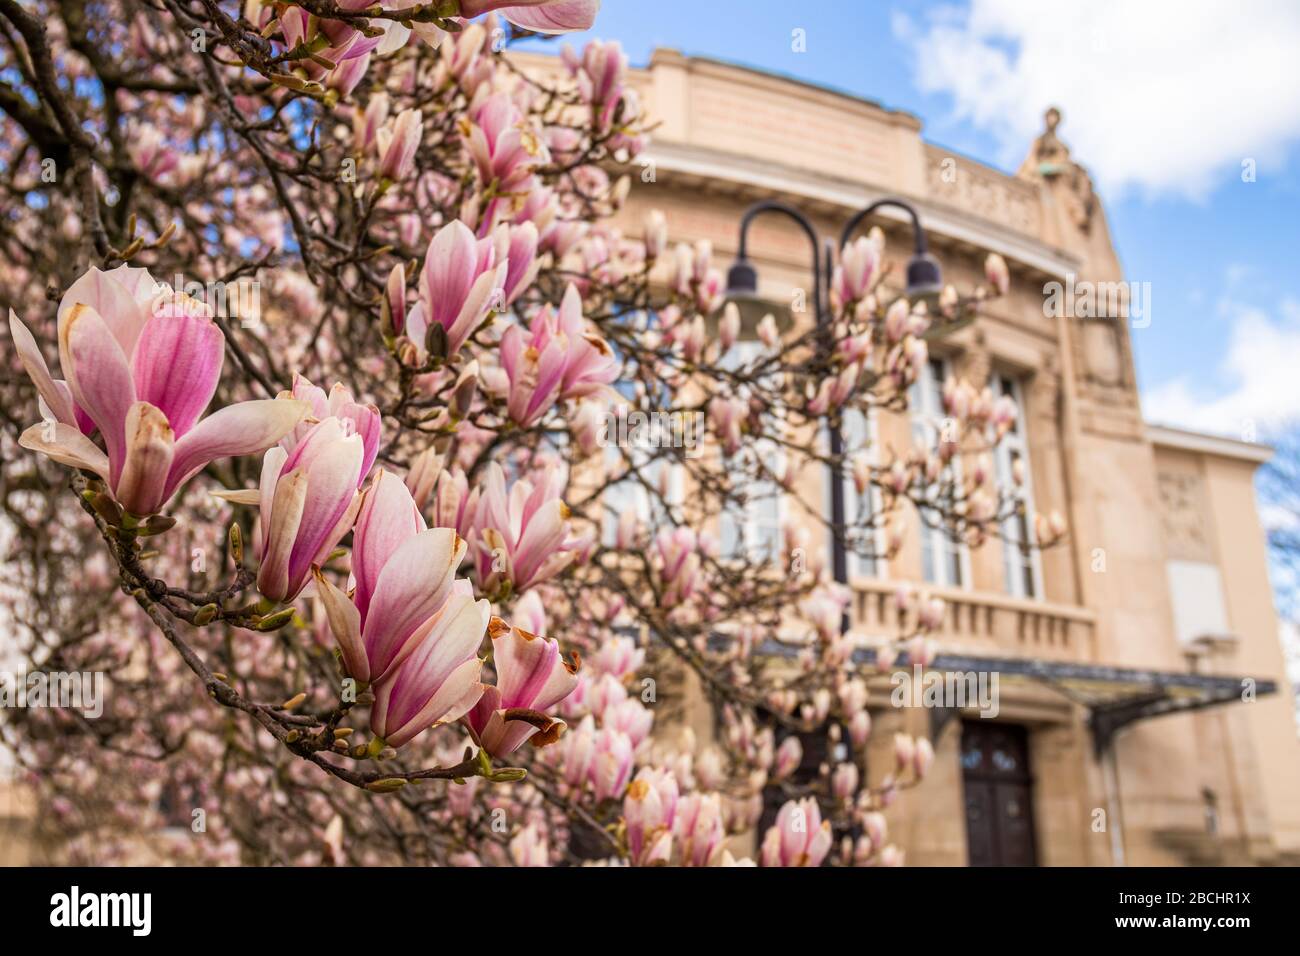 blooming magnolia in front of the Theater Gießen, official name Stadttheater Gießen (Gießen Municipal Theatre), in Gießen, Germany Stock Photo